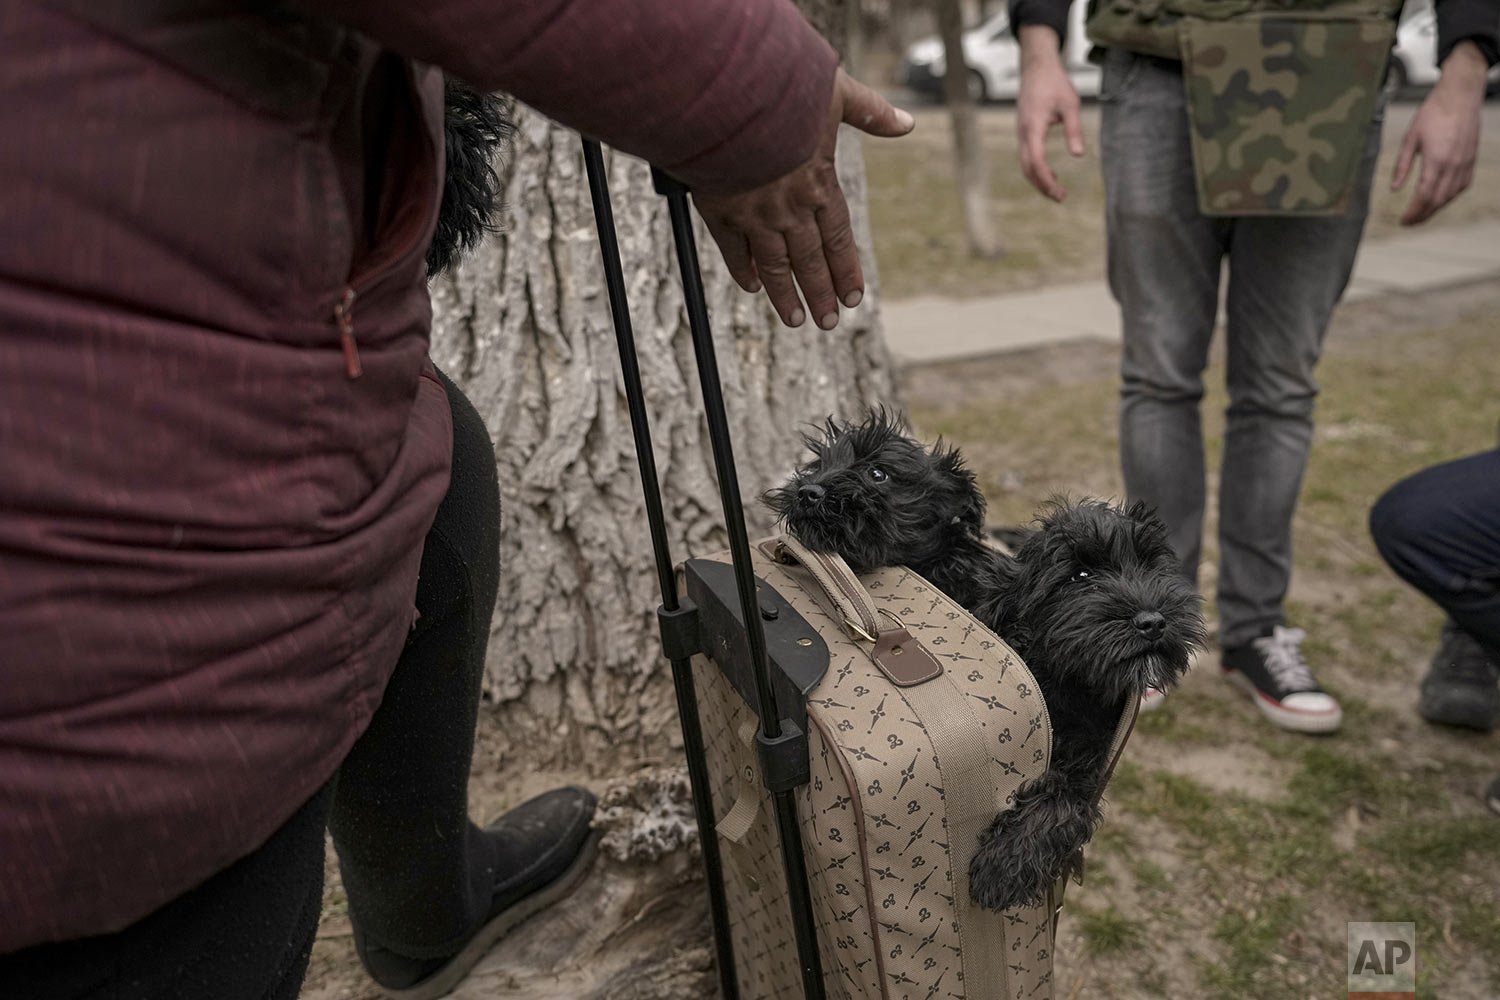  Dogs peek out from their owner’s roller luggage as they evacuate from Irpin on the outskirts of Kyiv, Ukraine, Saturday, March 26, 2022. Russia continues to pound cities throughout Ukraine — explosions rang out Saturday near the western city of Lviv